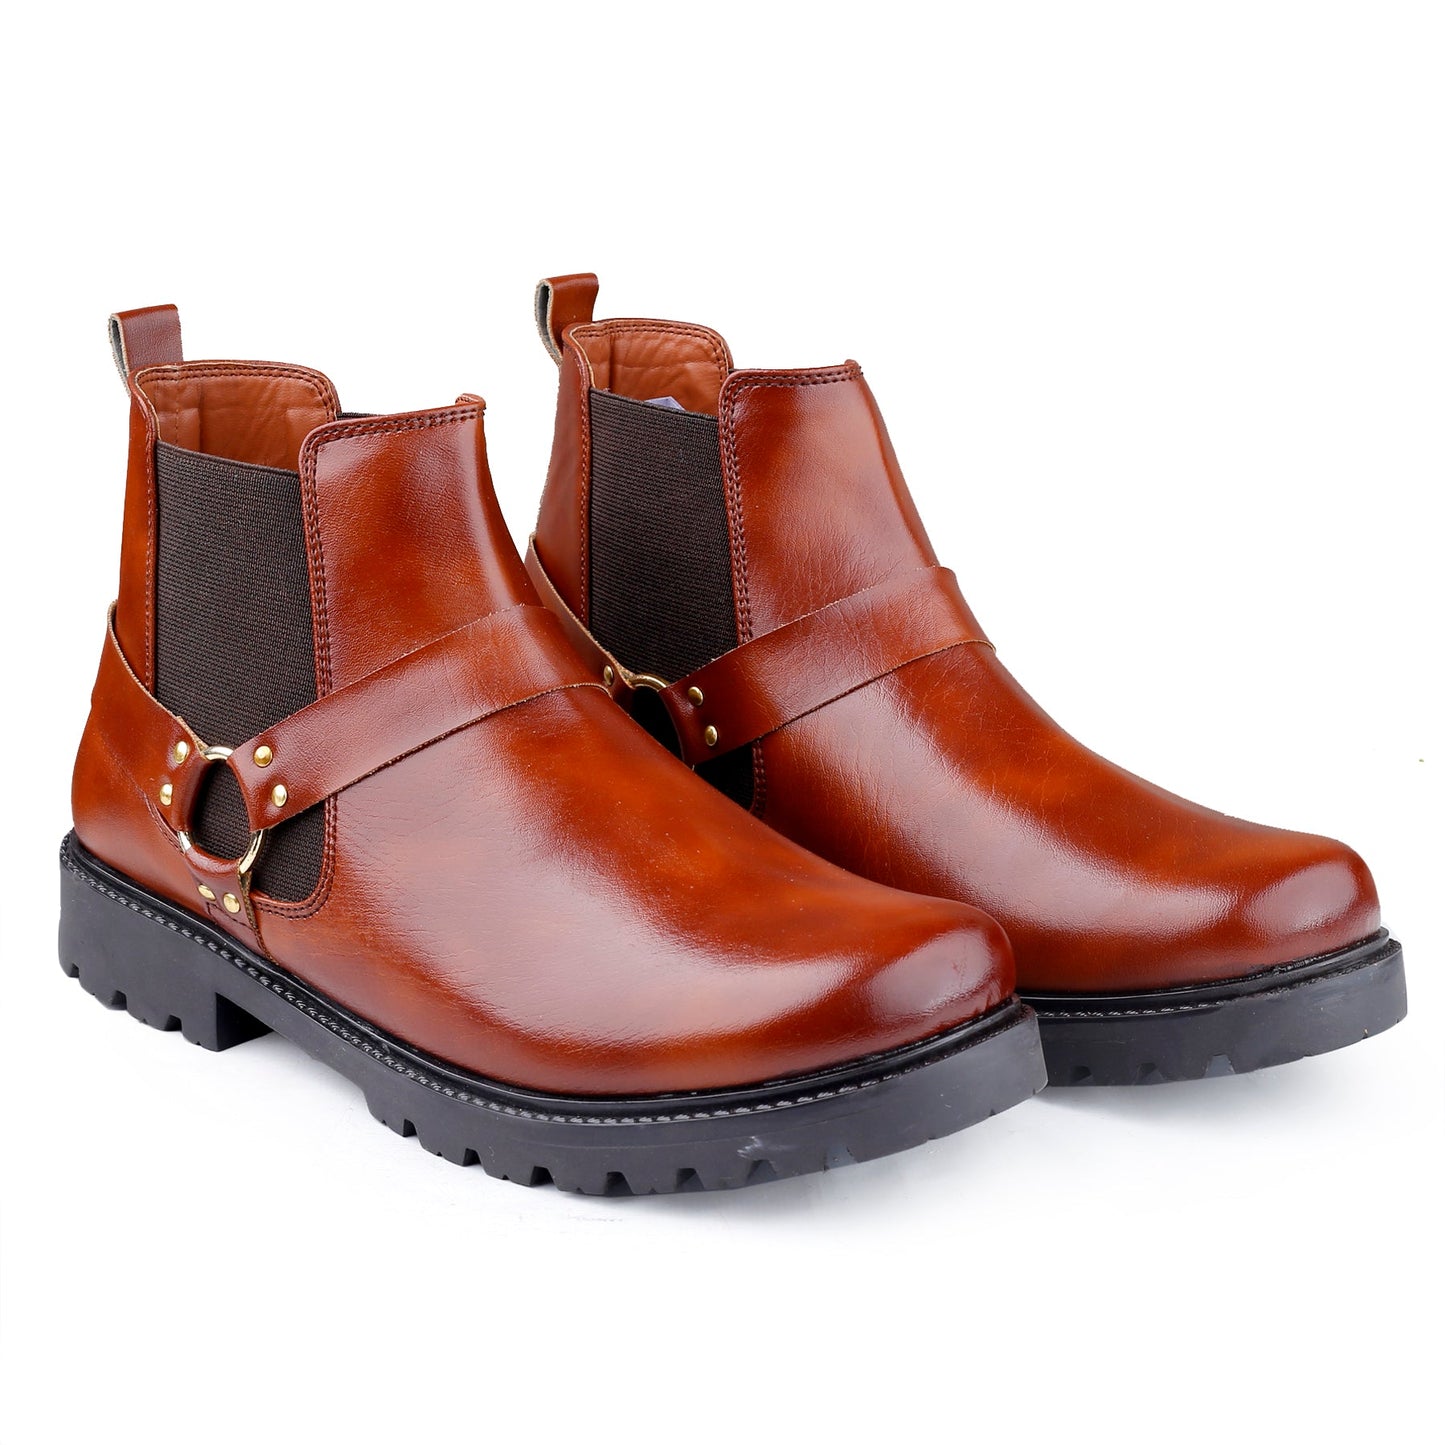 Bxxy Slip-on Ankle Stylish Boots for Men